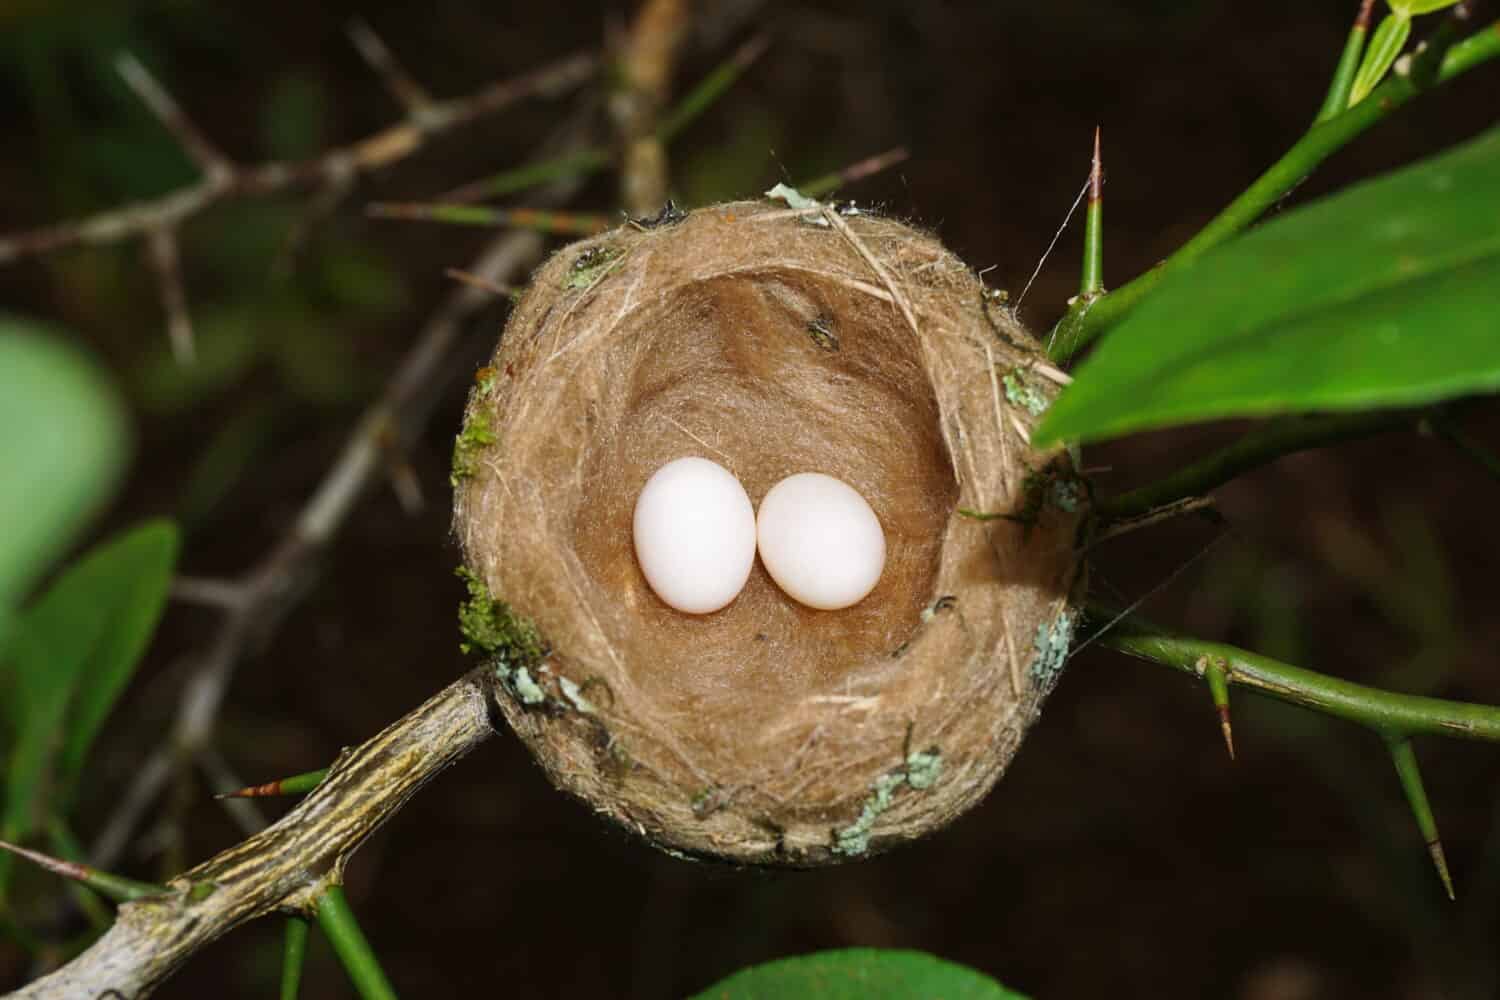 Hummingbird nest with two eggs, Panama, Central America